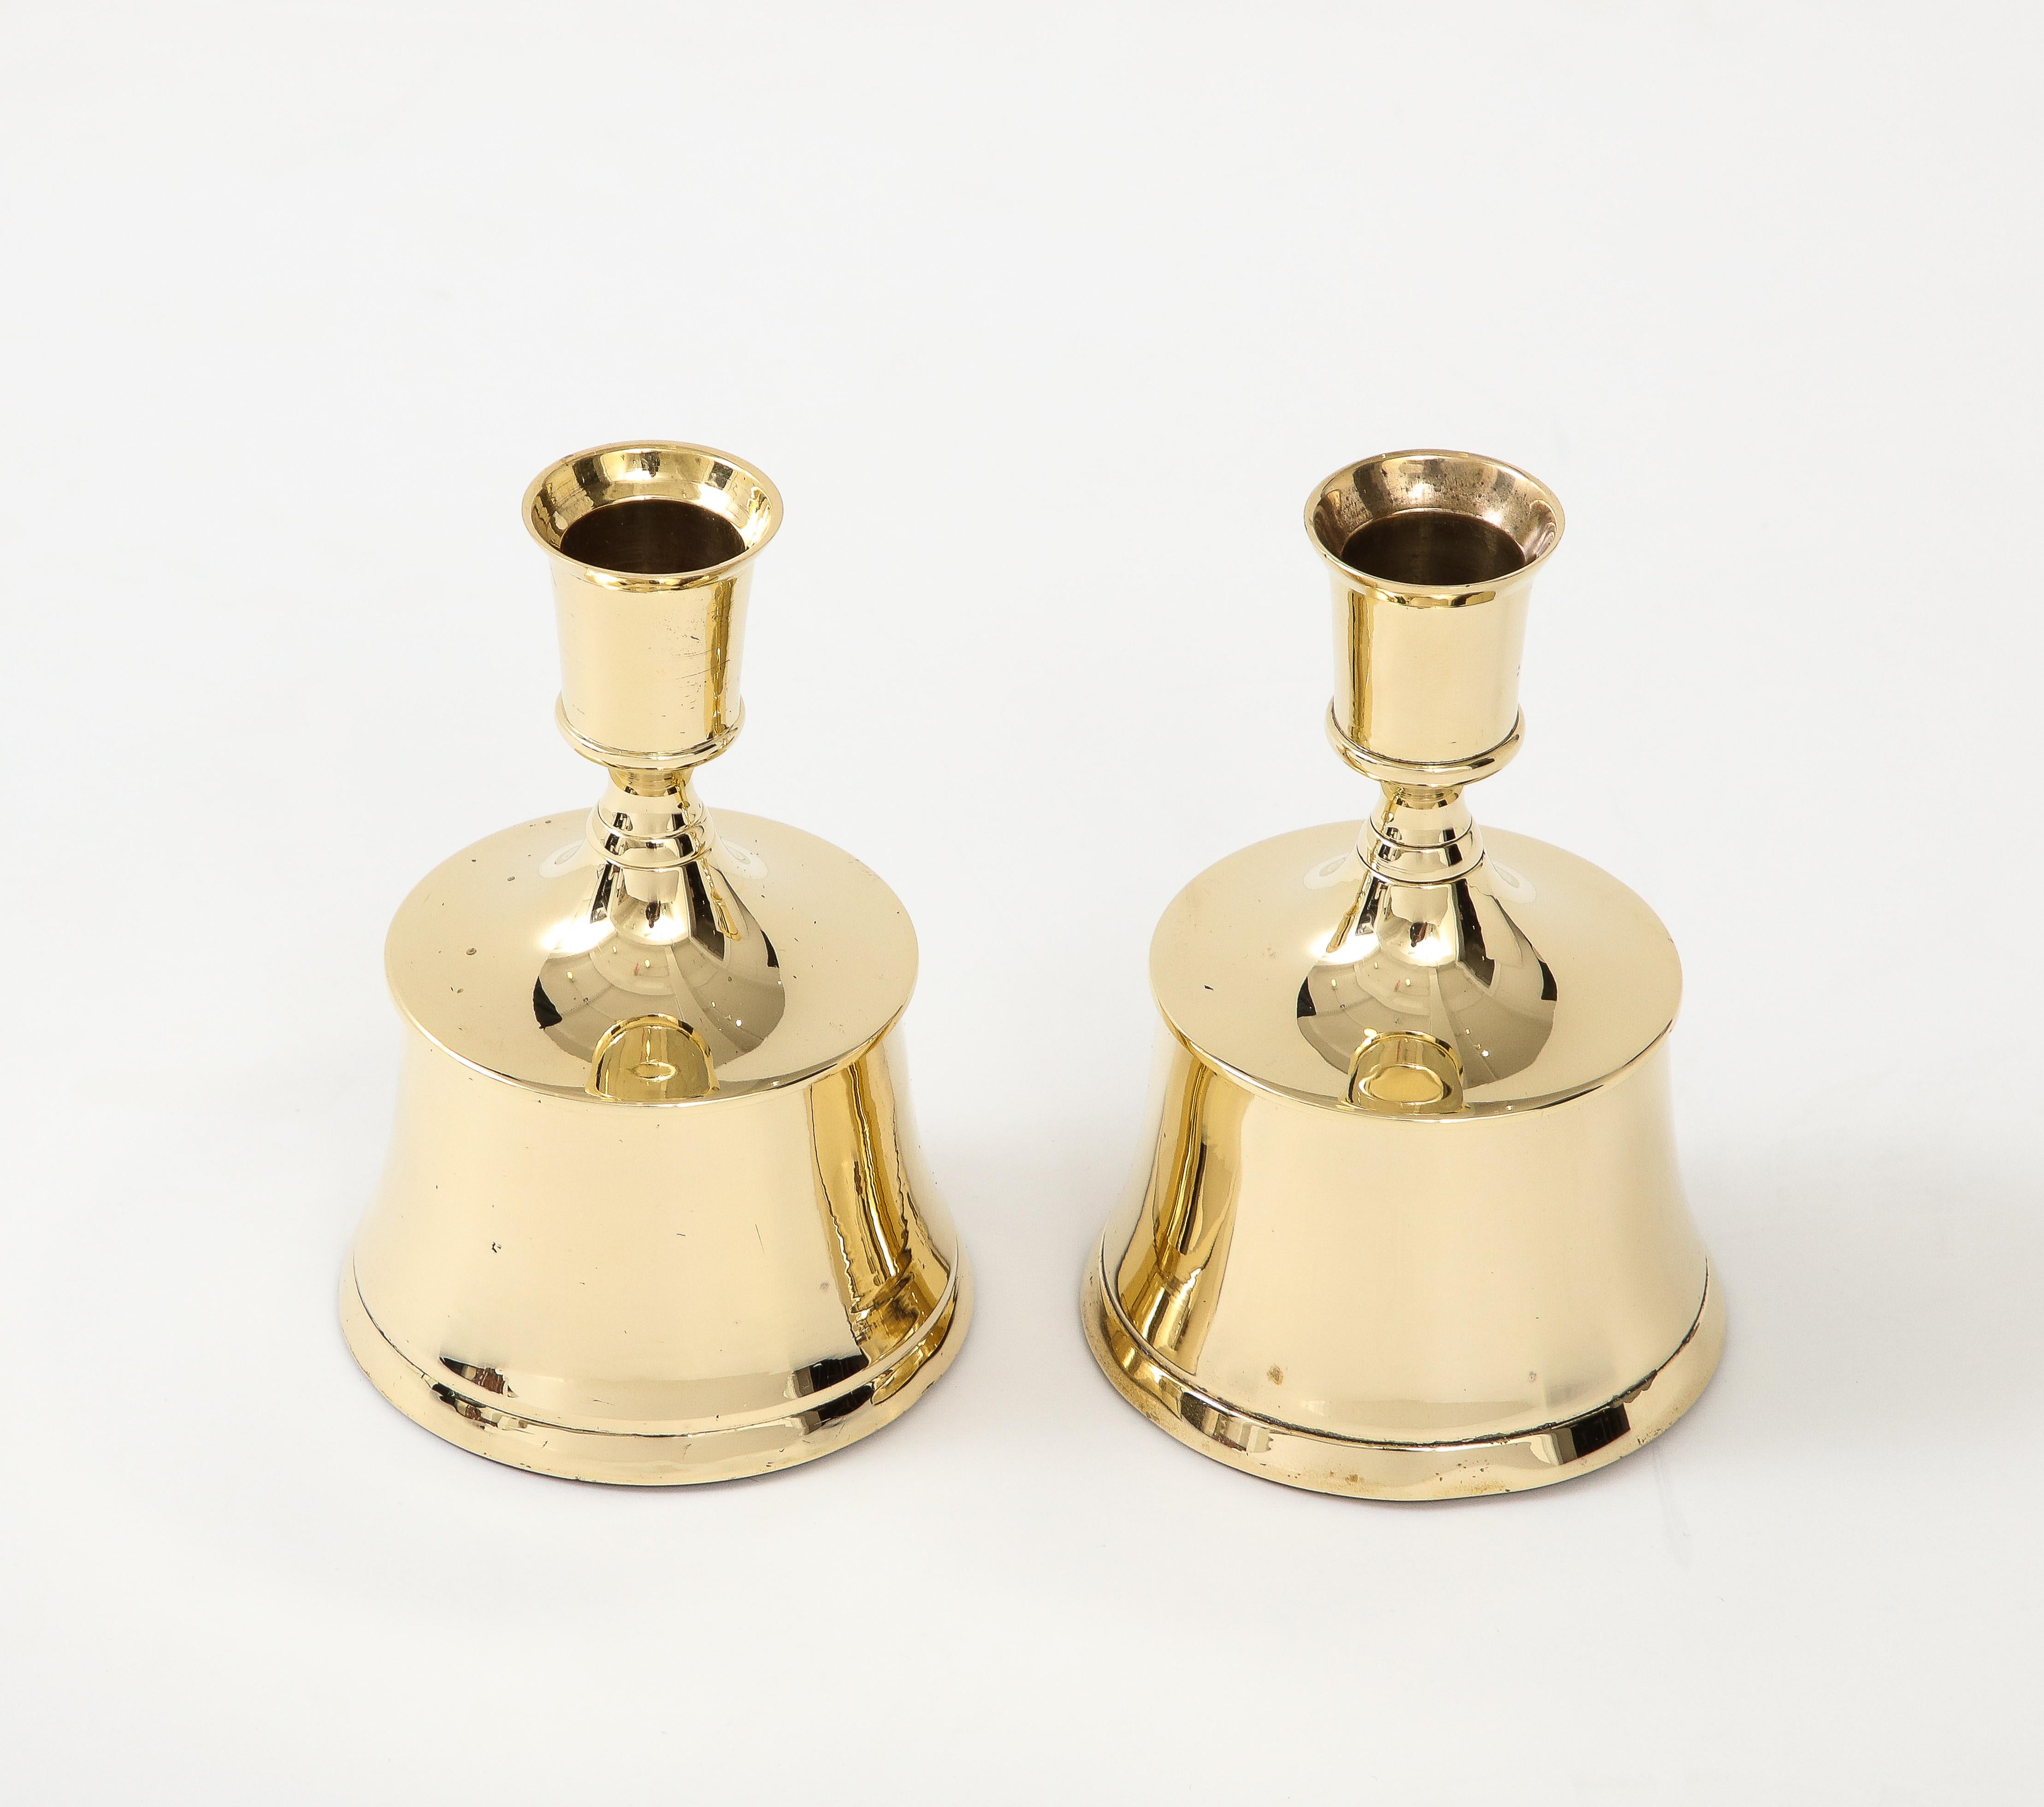 Mid Century brass candlesticks by Tommi Parzinger/Heirloom. Newly polished and lacquered. 